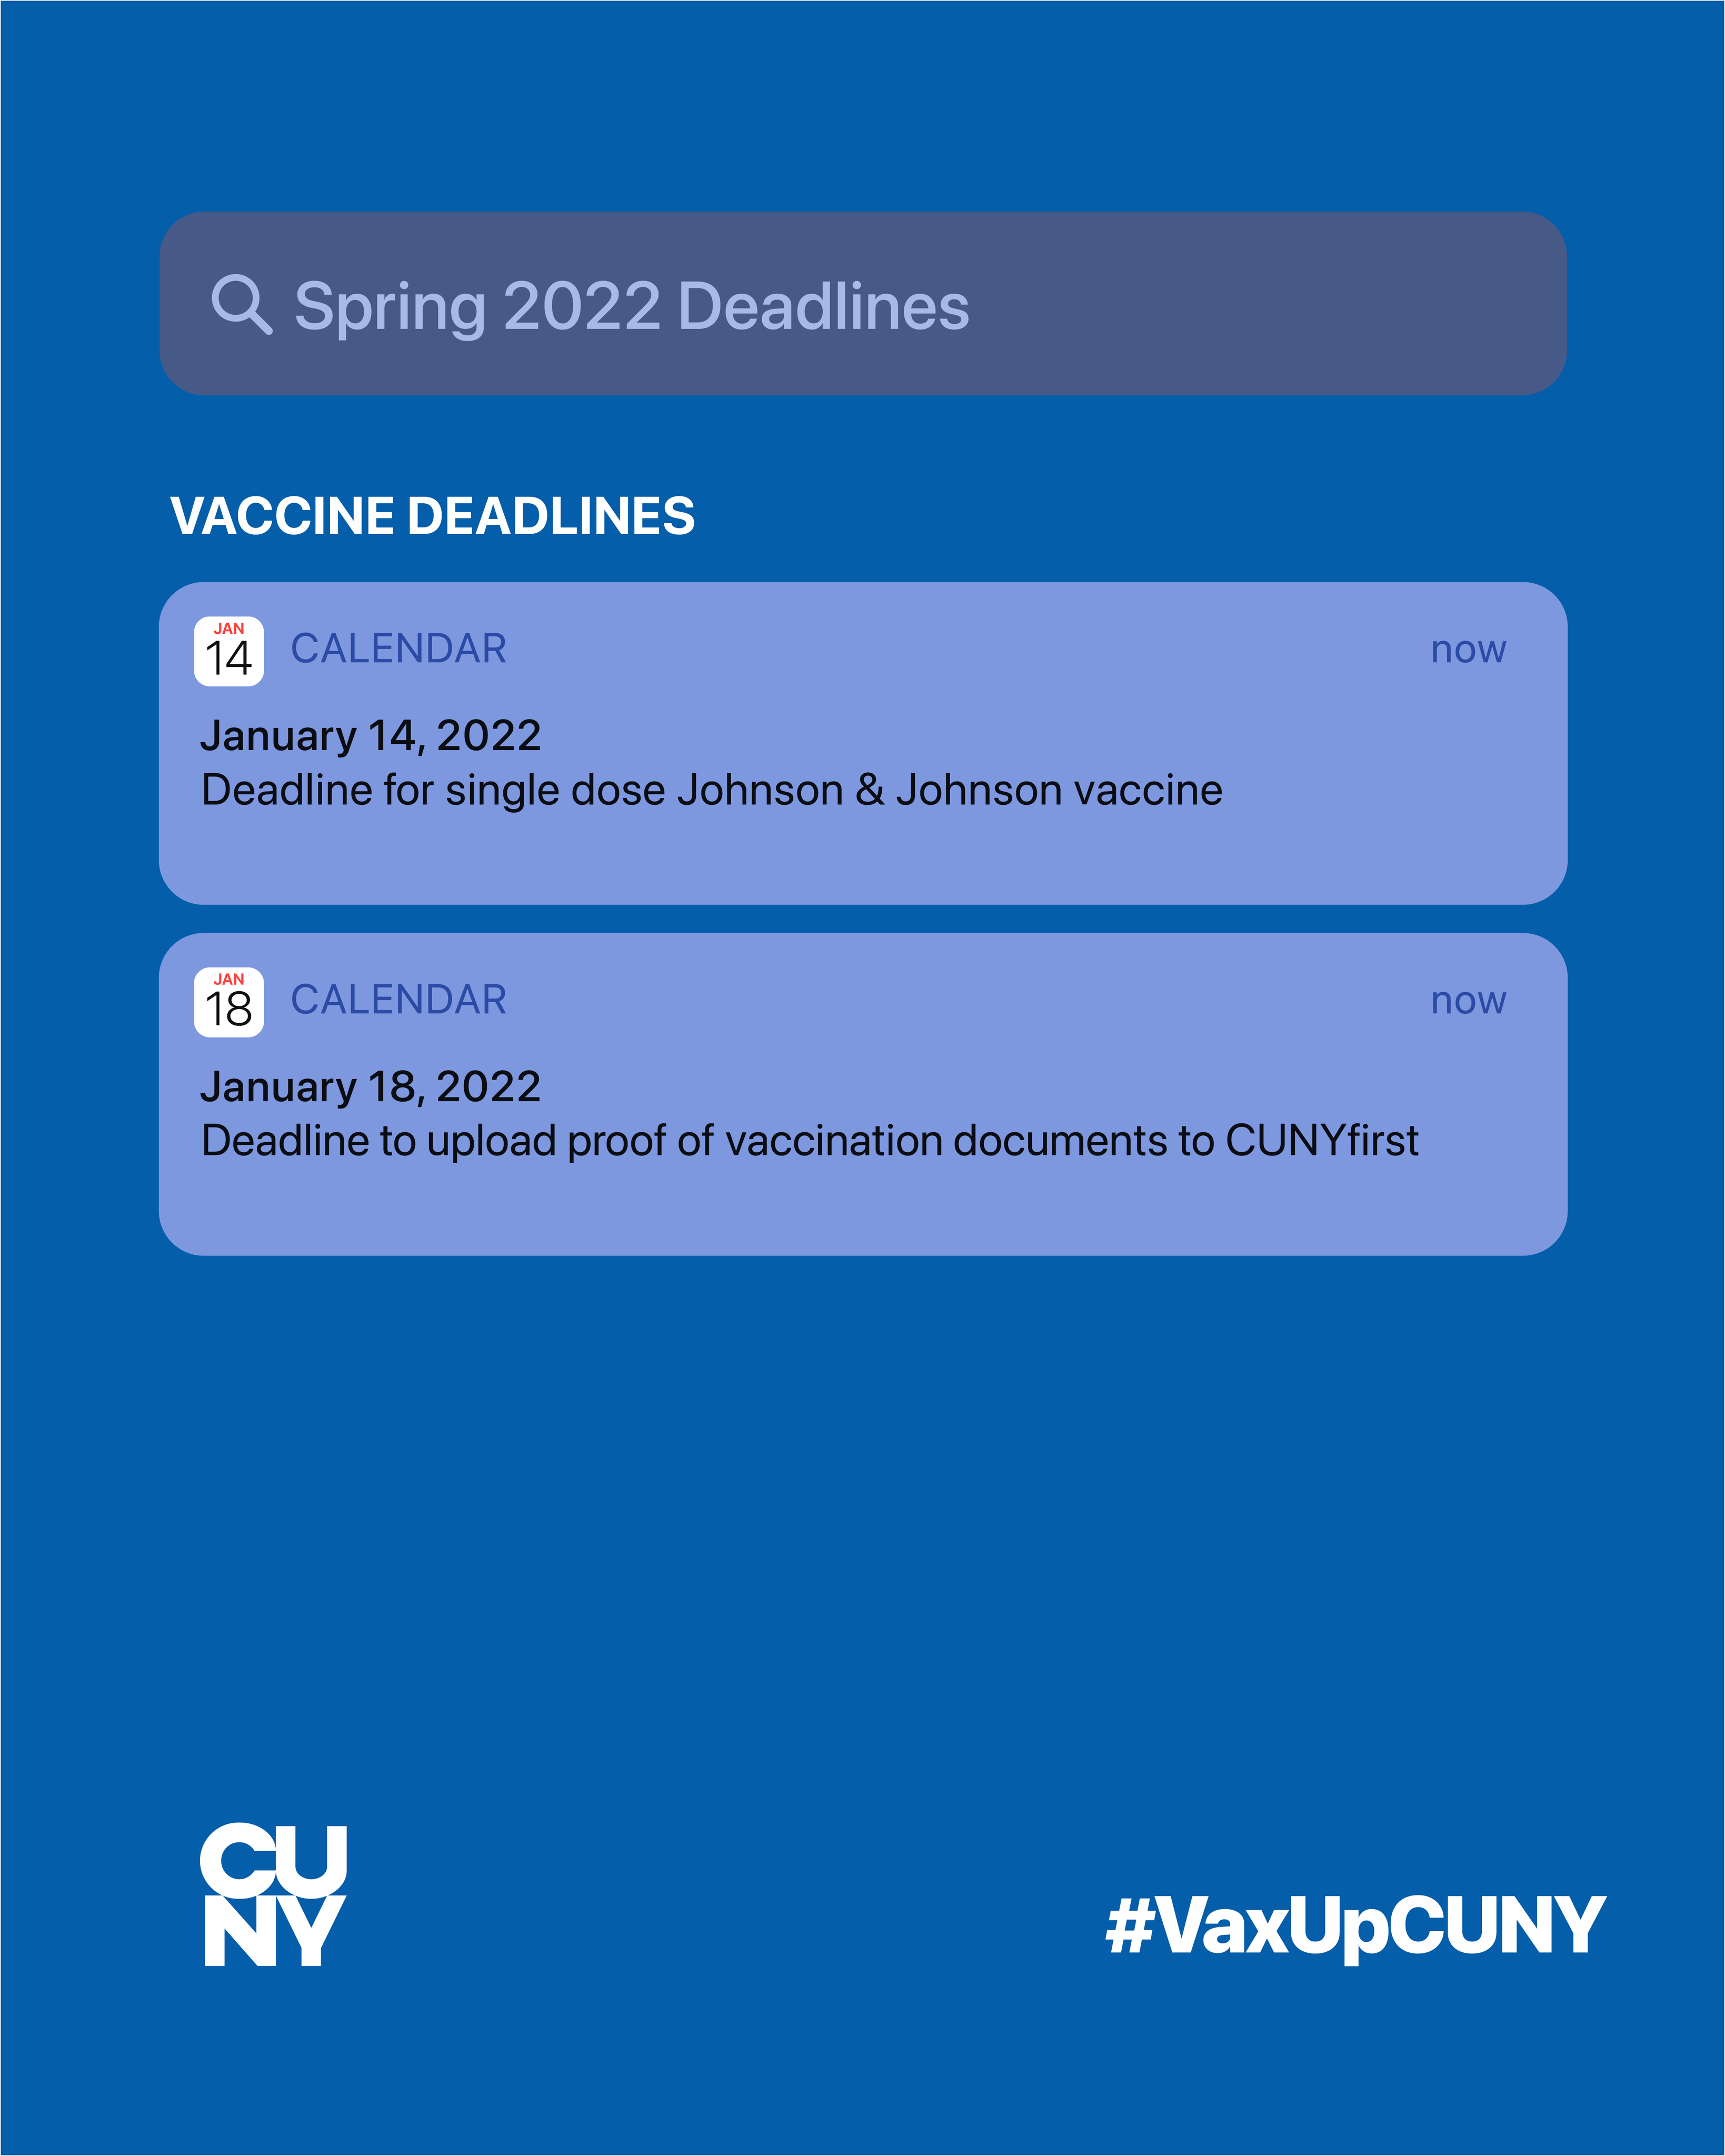 Spring 2022 Cuny Calendar The City University Of New York On Twitter: "Students Enrolled In Hybrid  And In-Person Classes Are Required To Be Vaccinated. 🗓️1/14: Deadline To  Get The Johnson & Johnson Vaccine 🗓️1/18: Deadline To